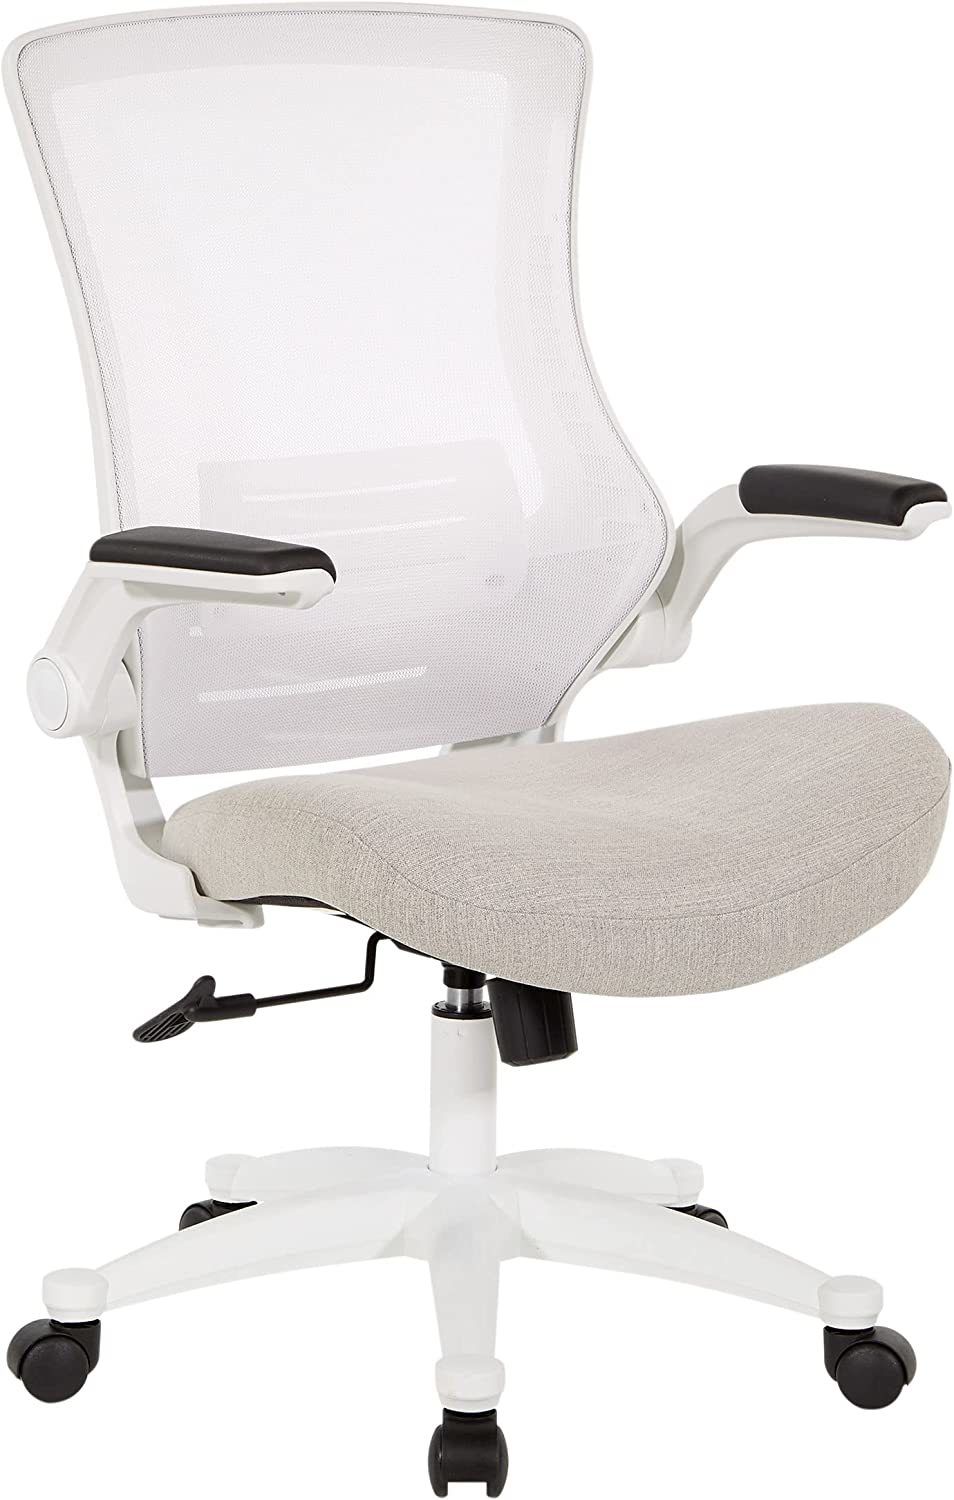 Primary image for Office Star Screen Back Manager'S Office Chair With Padded Flip Arms And A White